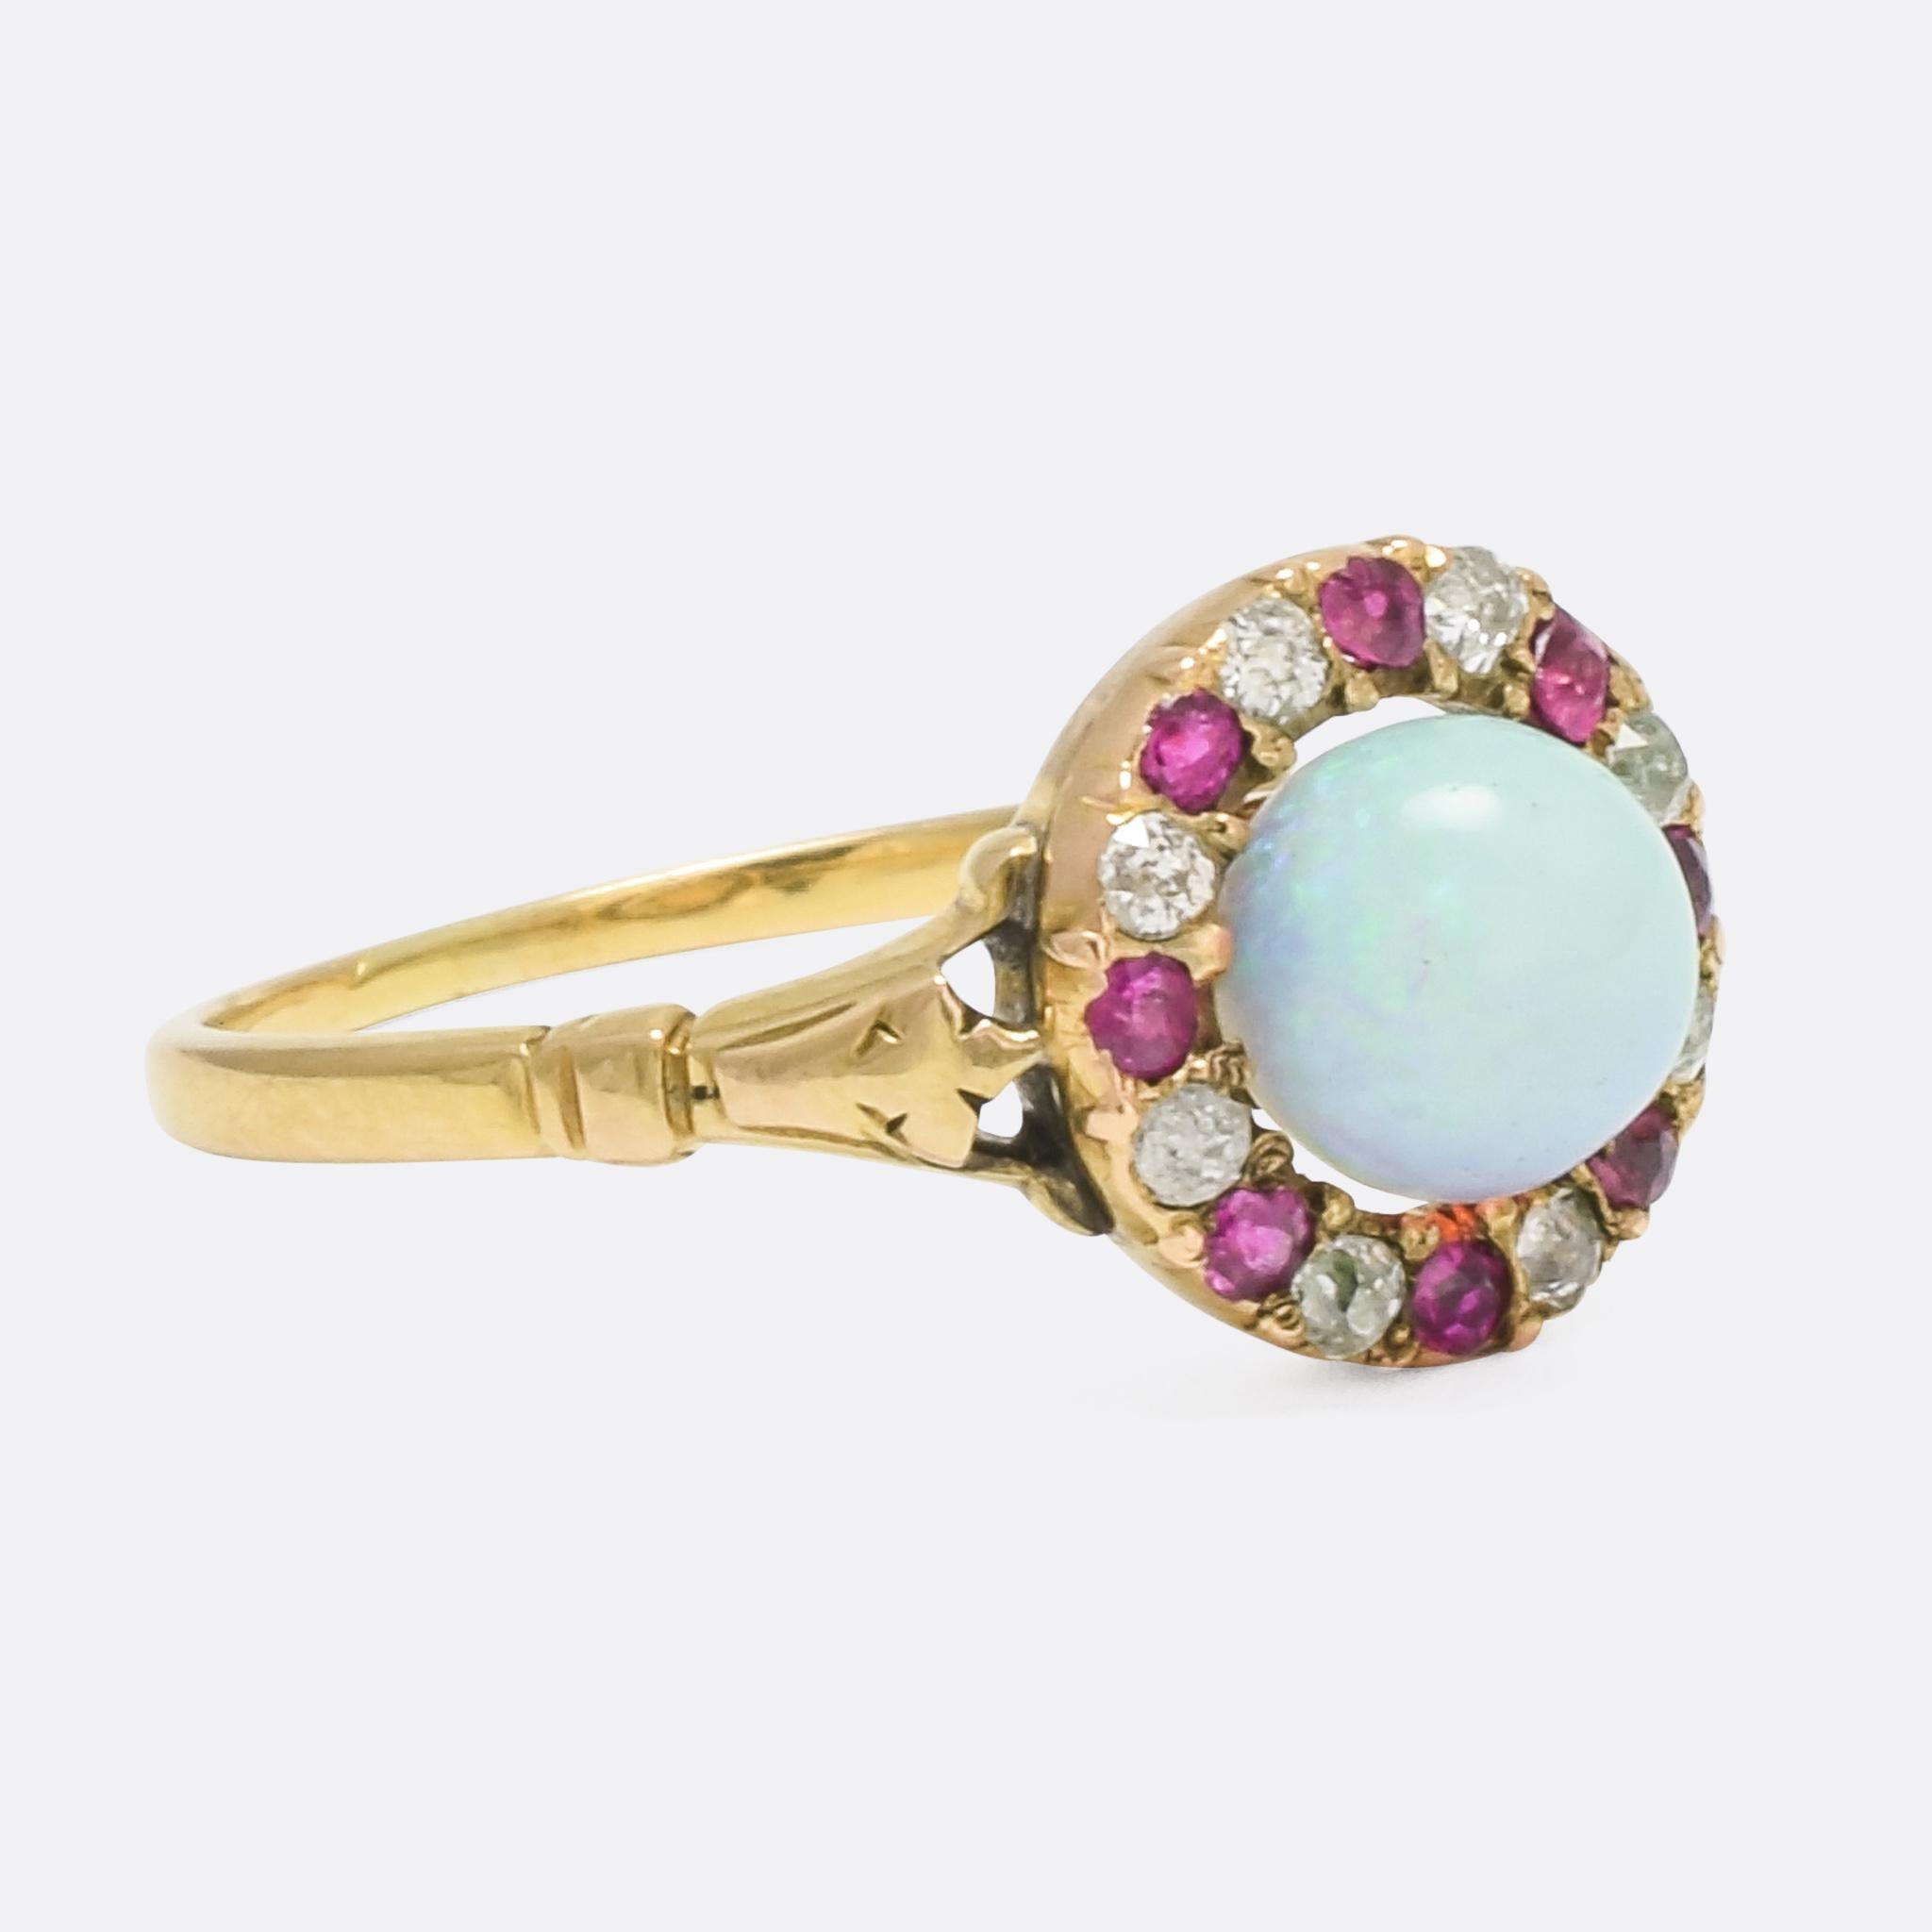 A beautiful antique Victorian cluster ring dating from c.1860. The central stone is a vibrant blue/green opal, cut into a nearly spherical cabochon that looks like a little planet Earth; it's surrounded by a halo or alternating diamonds and rubies.